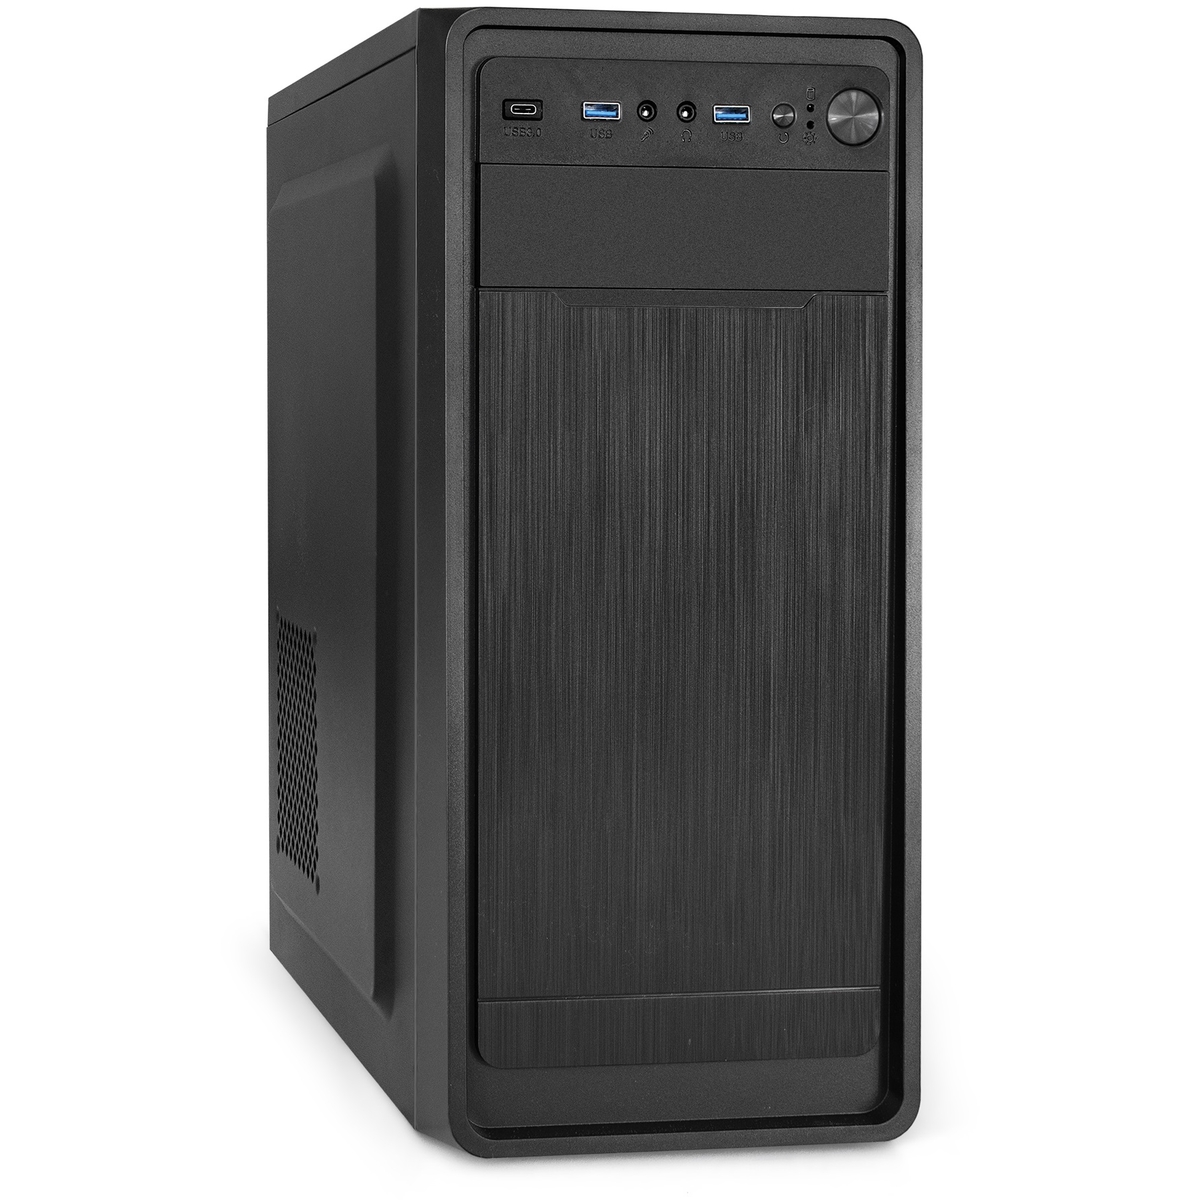 Miditower ExeGate XP-332UC-XP500